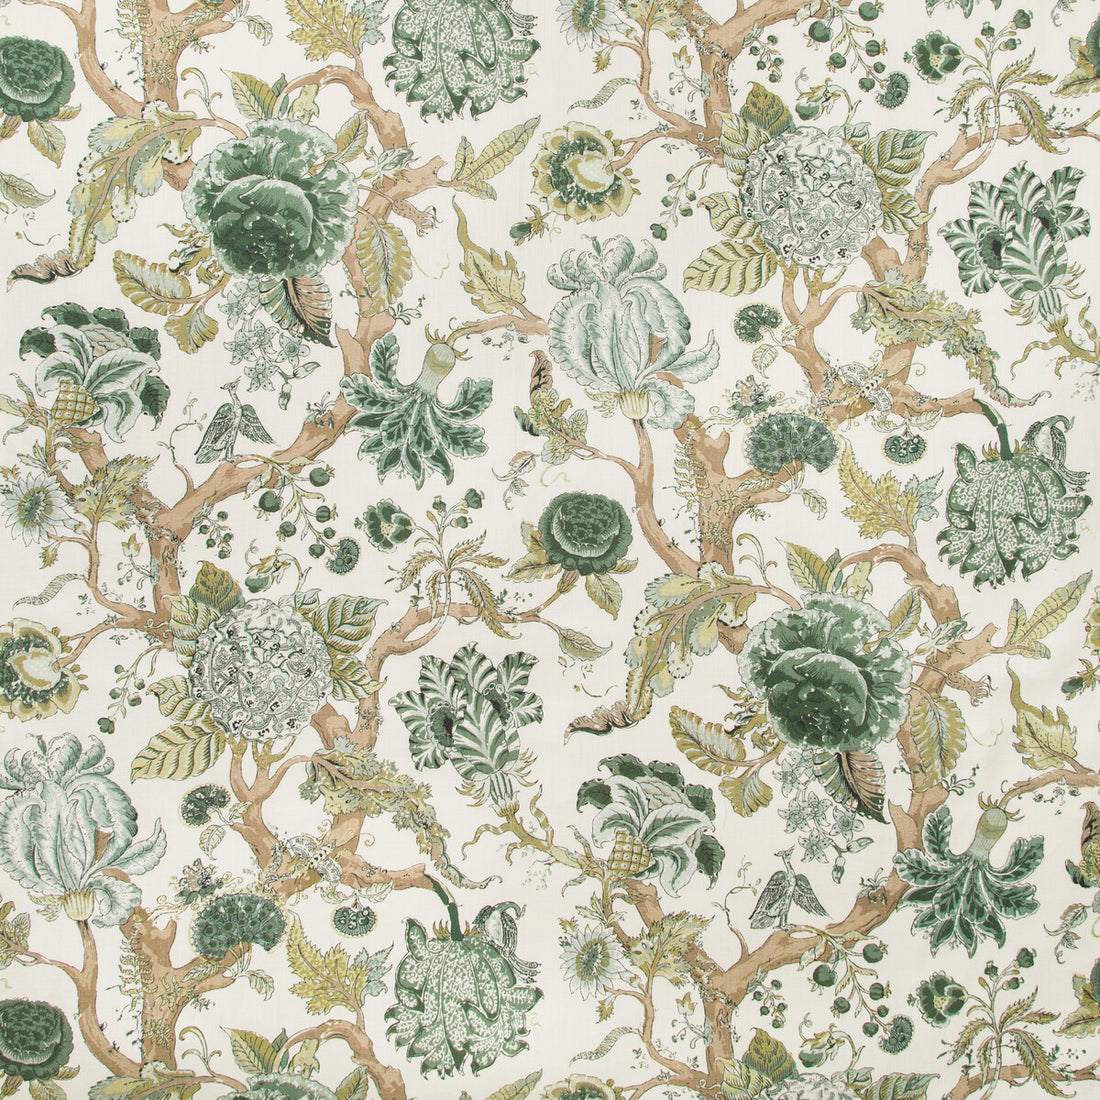 Adlington fabric in green color - pattern 2019102.13.0 - by Lee Jofa in the Manor House collection